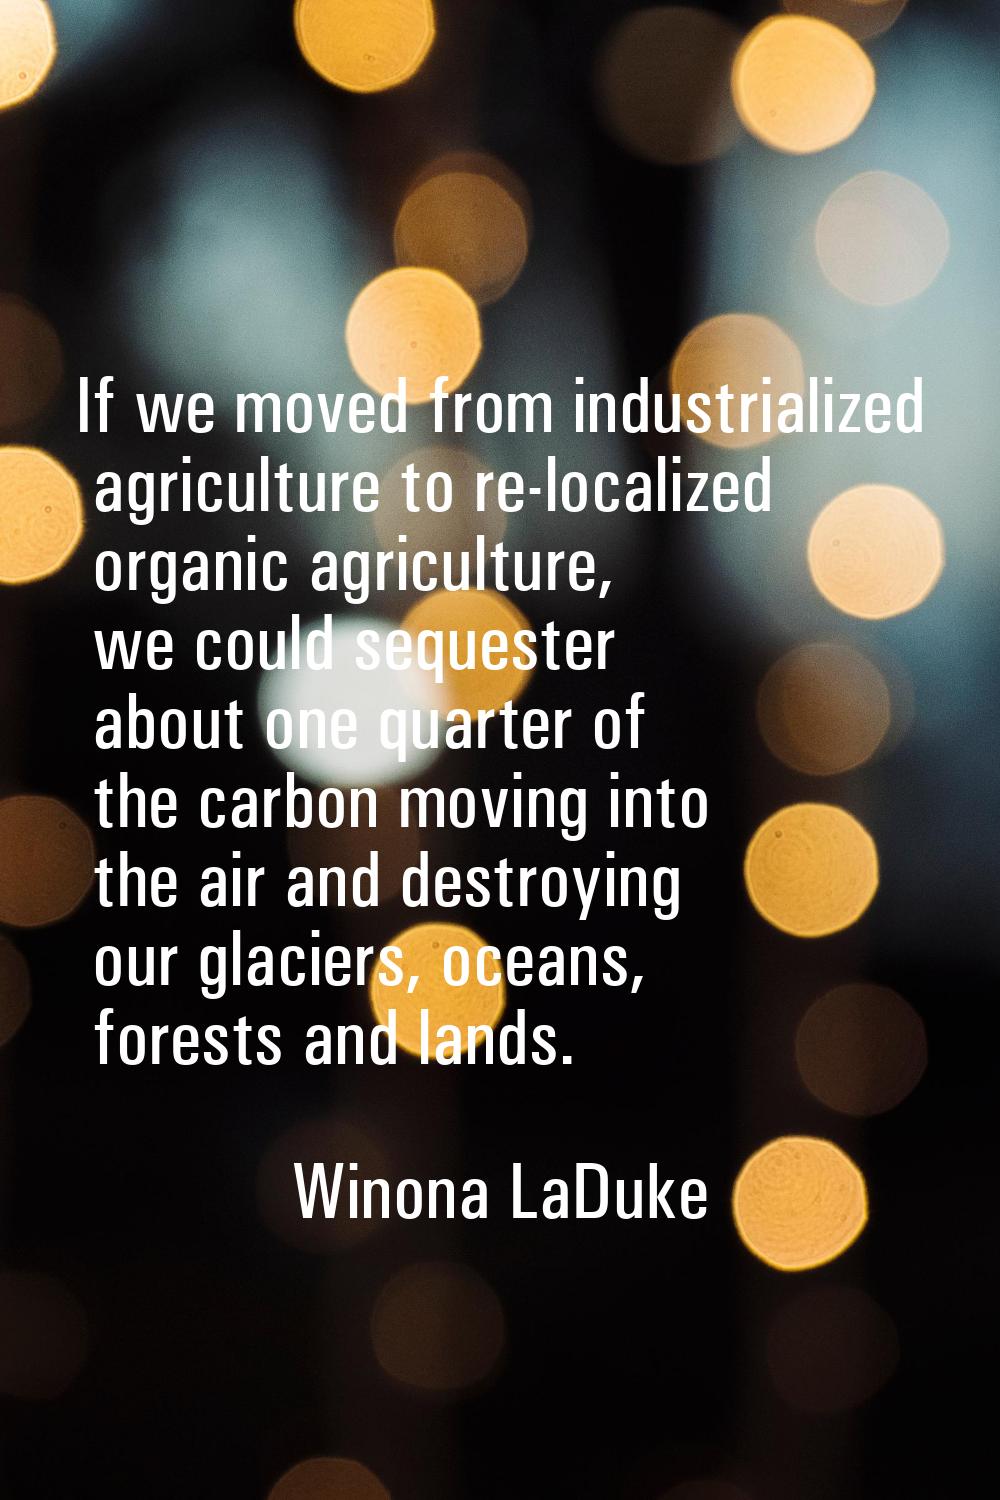 If we moved from industrialized agriculture to re-localized organic agriculture, we could sequester